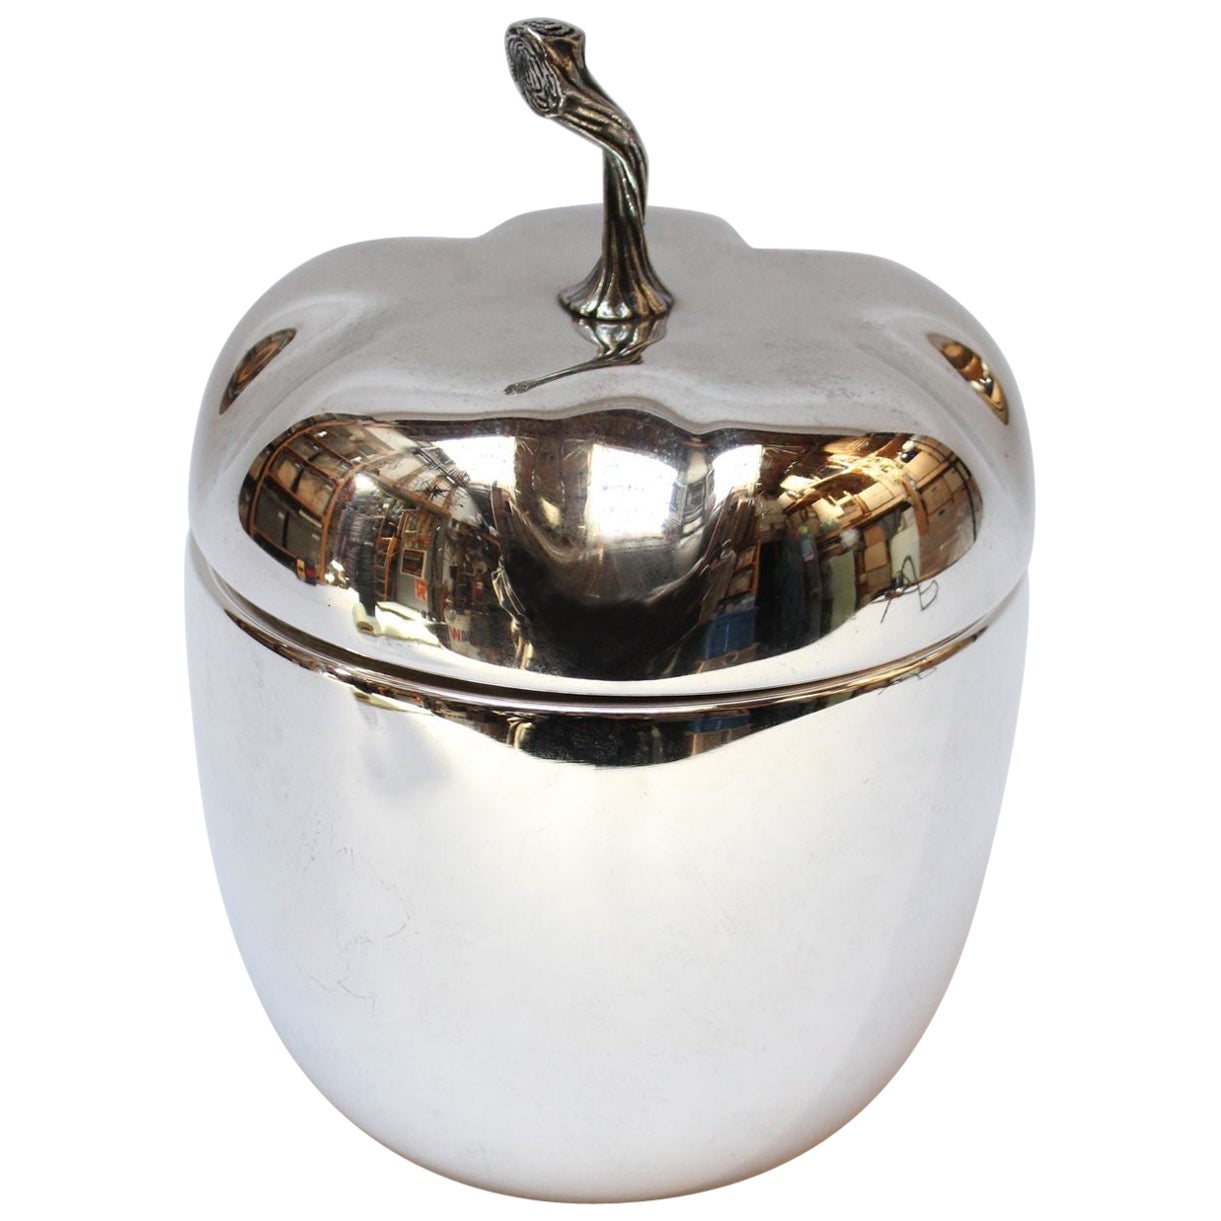 Italian Modernist Silver-Plated "Pepper" Ice Bucket with Neon Green Interior For Sale